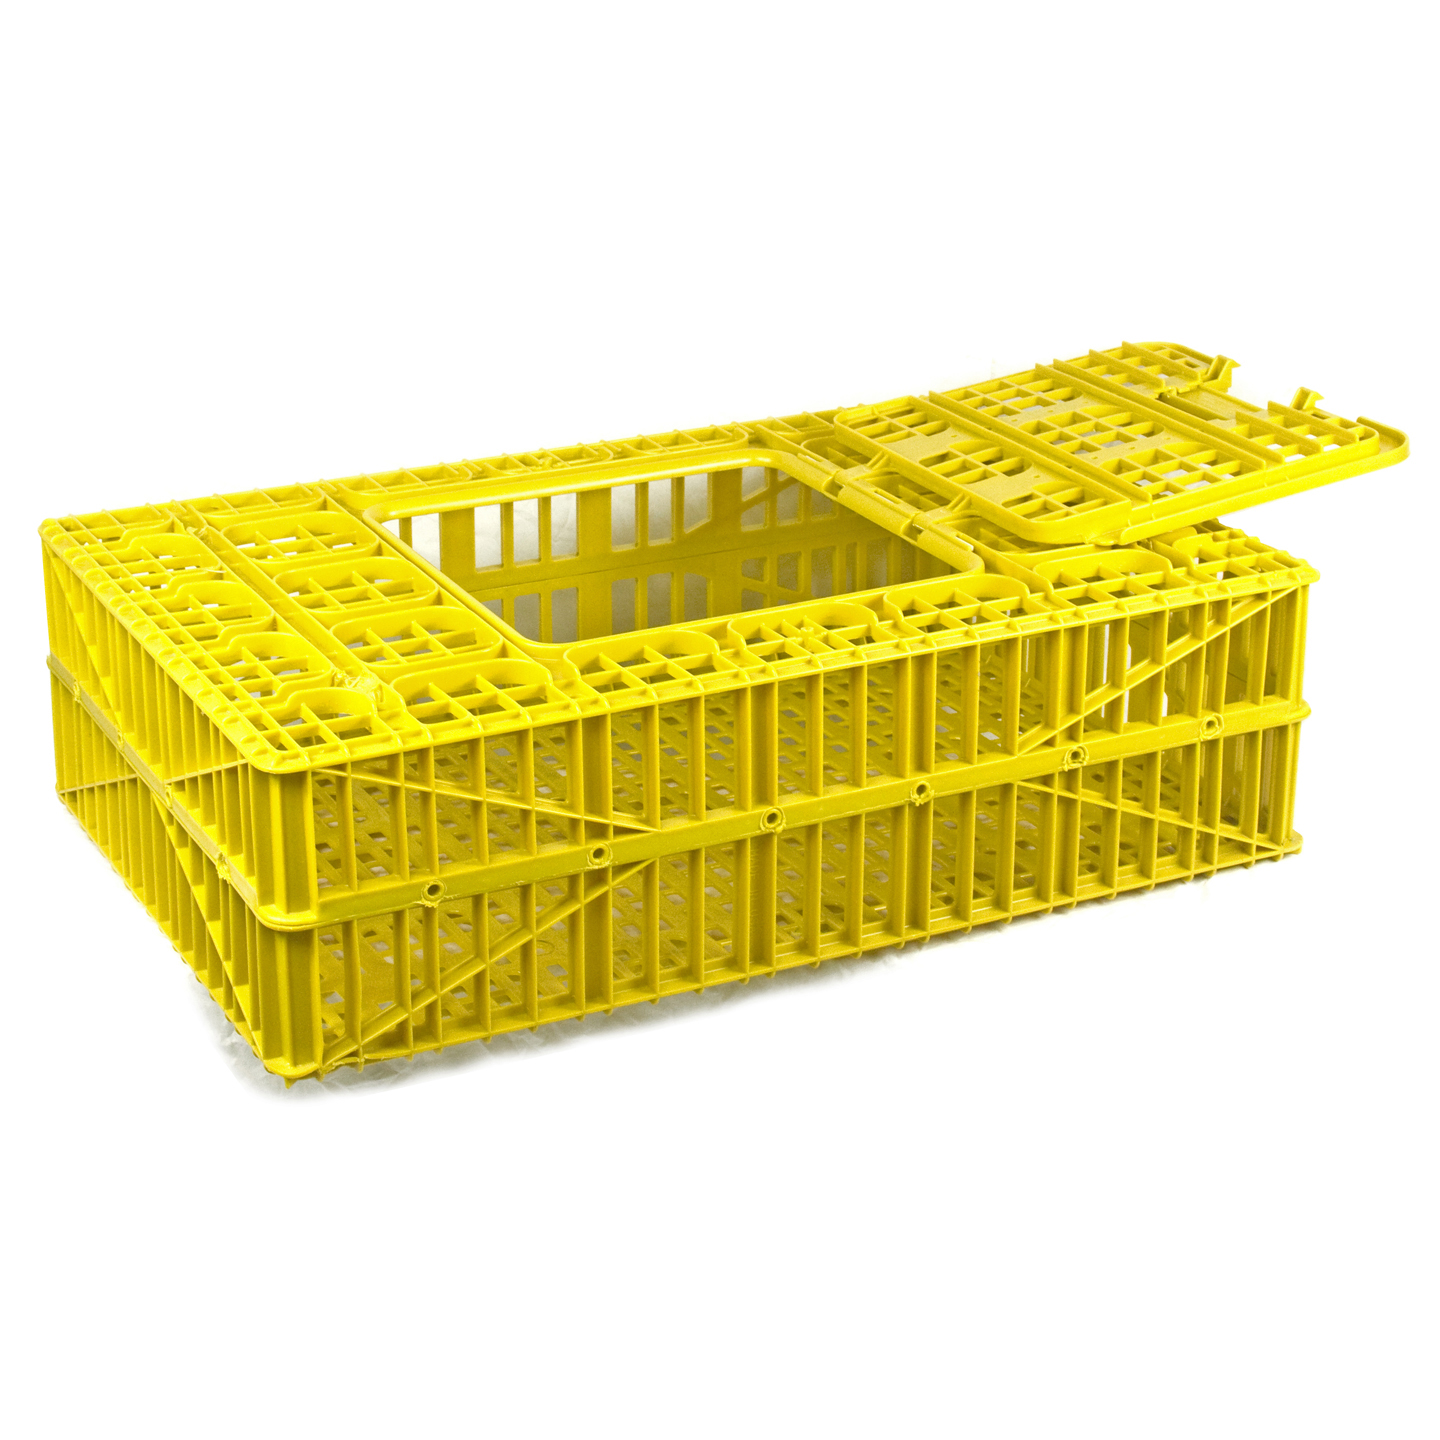 LARGE POULTRY CRATE x2 